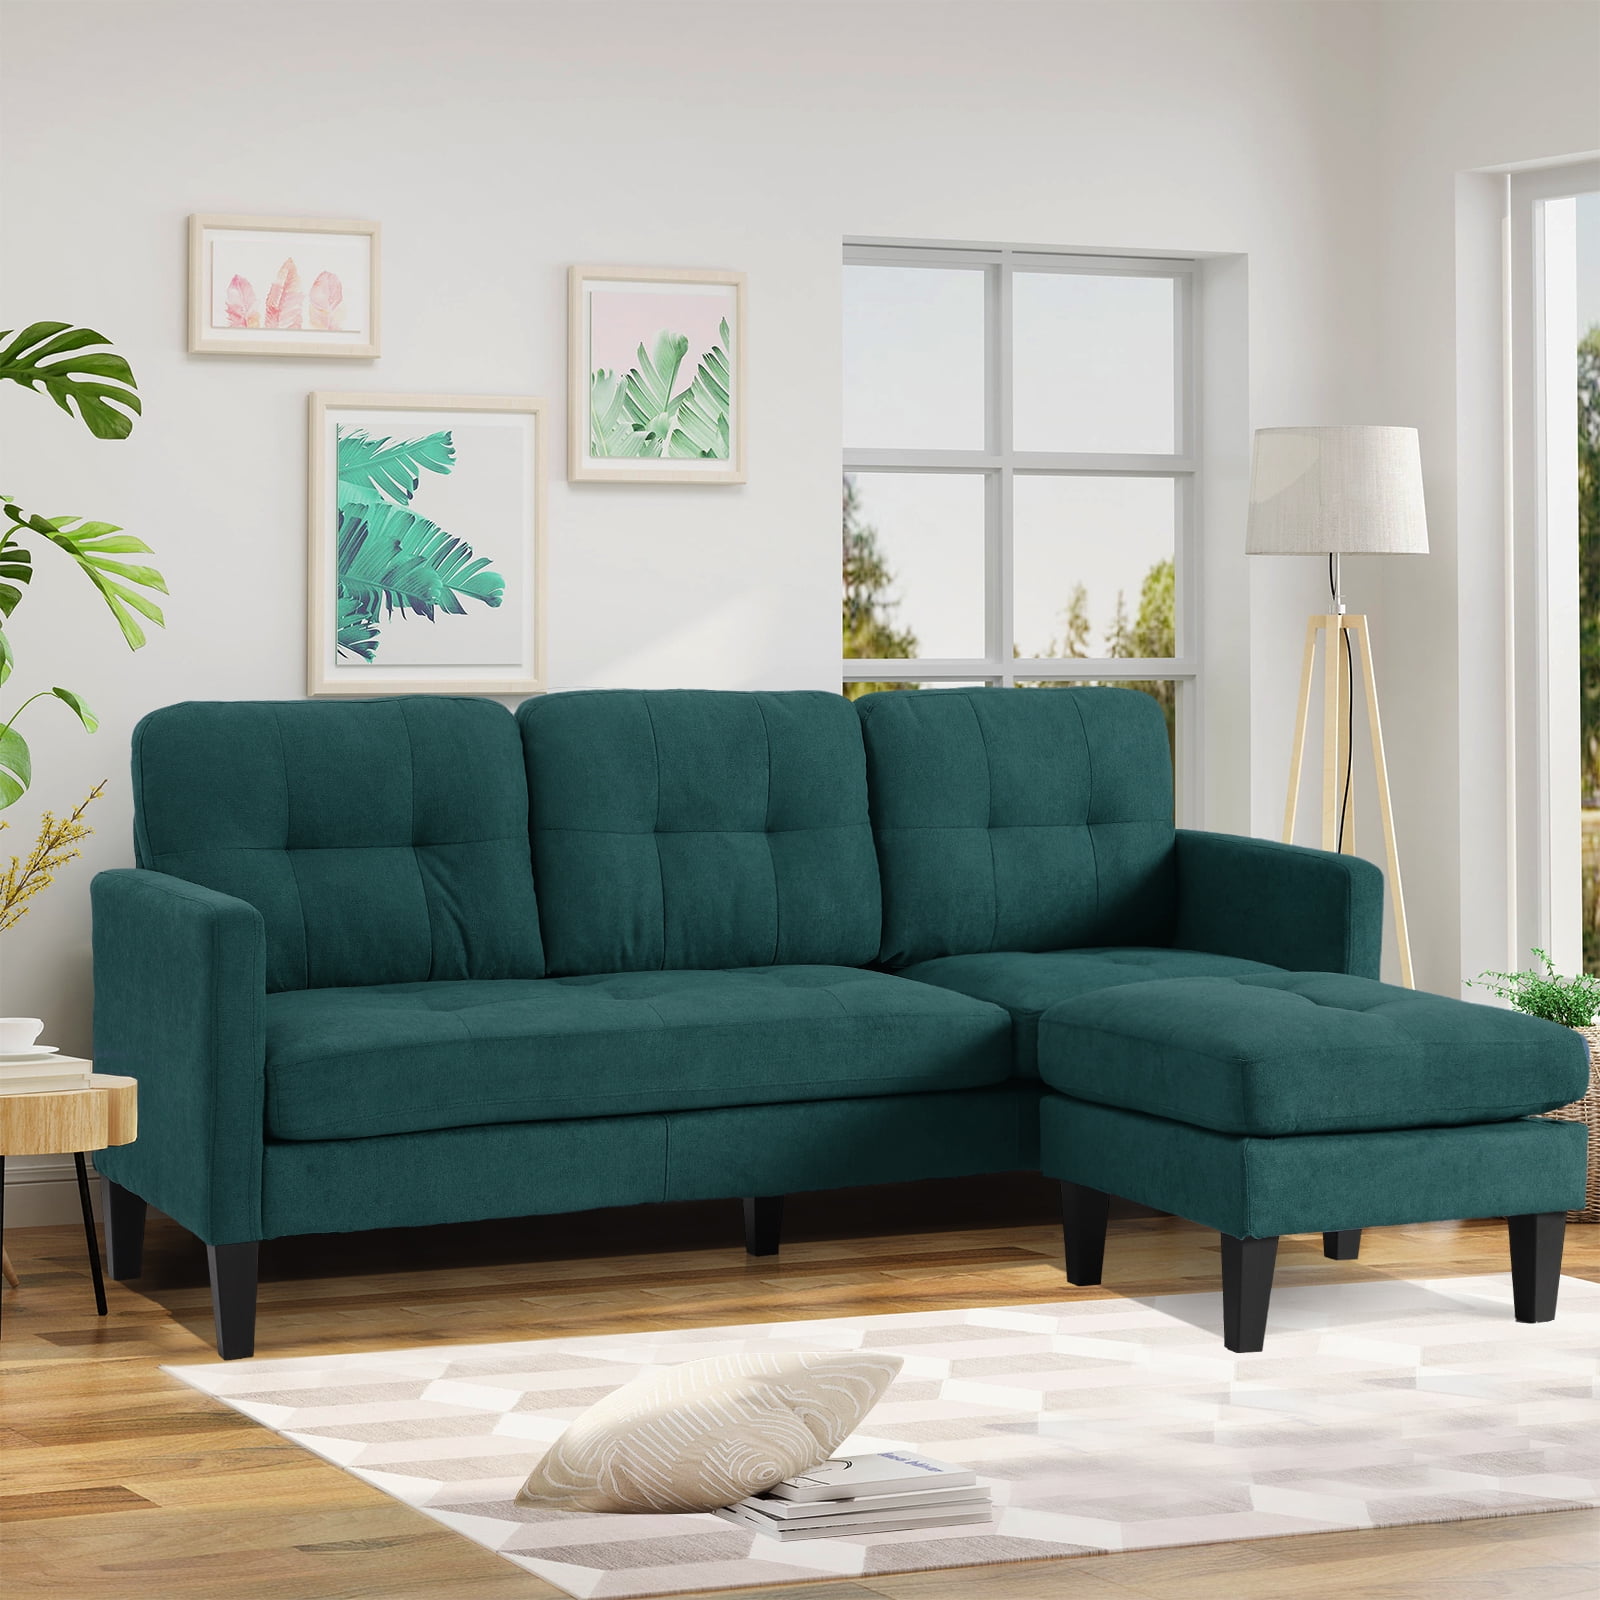 Magic Union Convertible Sectional Sofa, L-Shaped Couch for Small Space ...